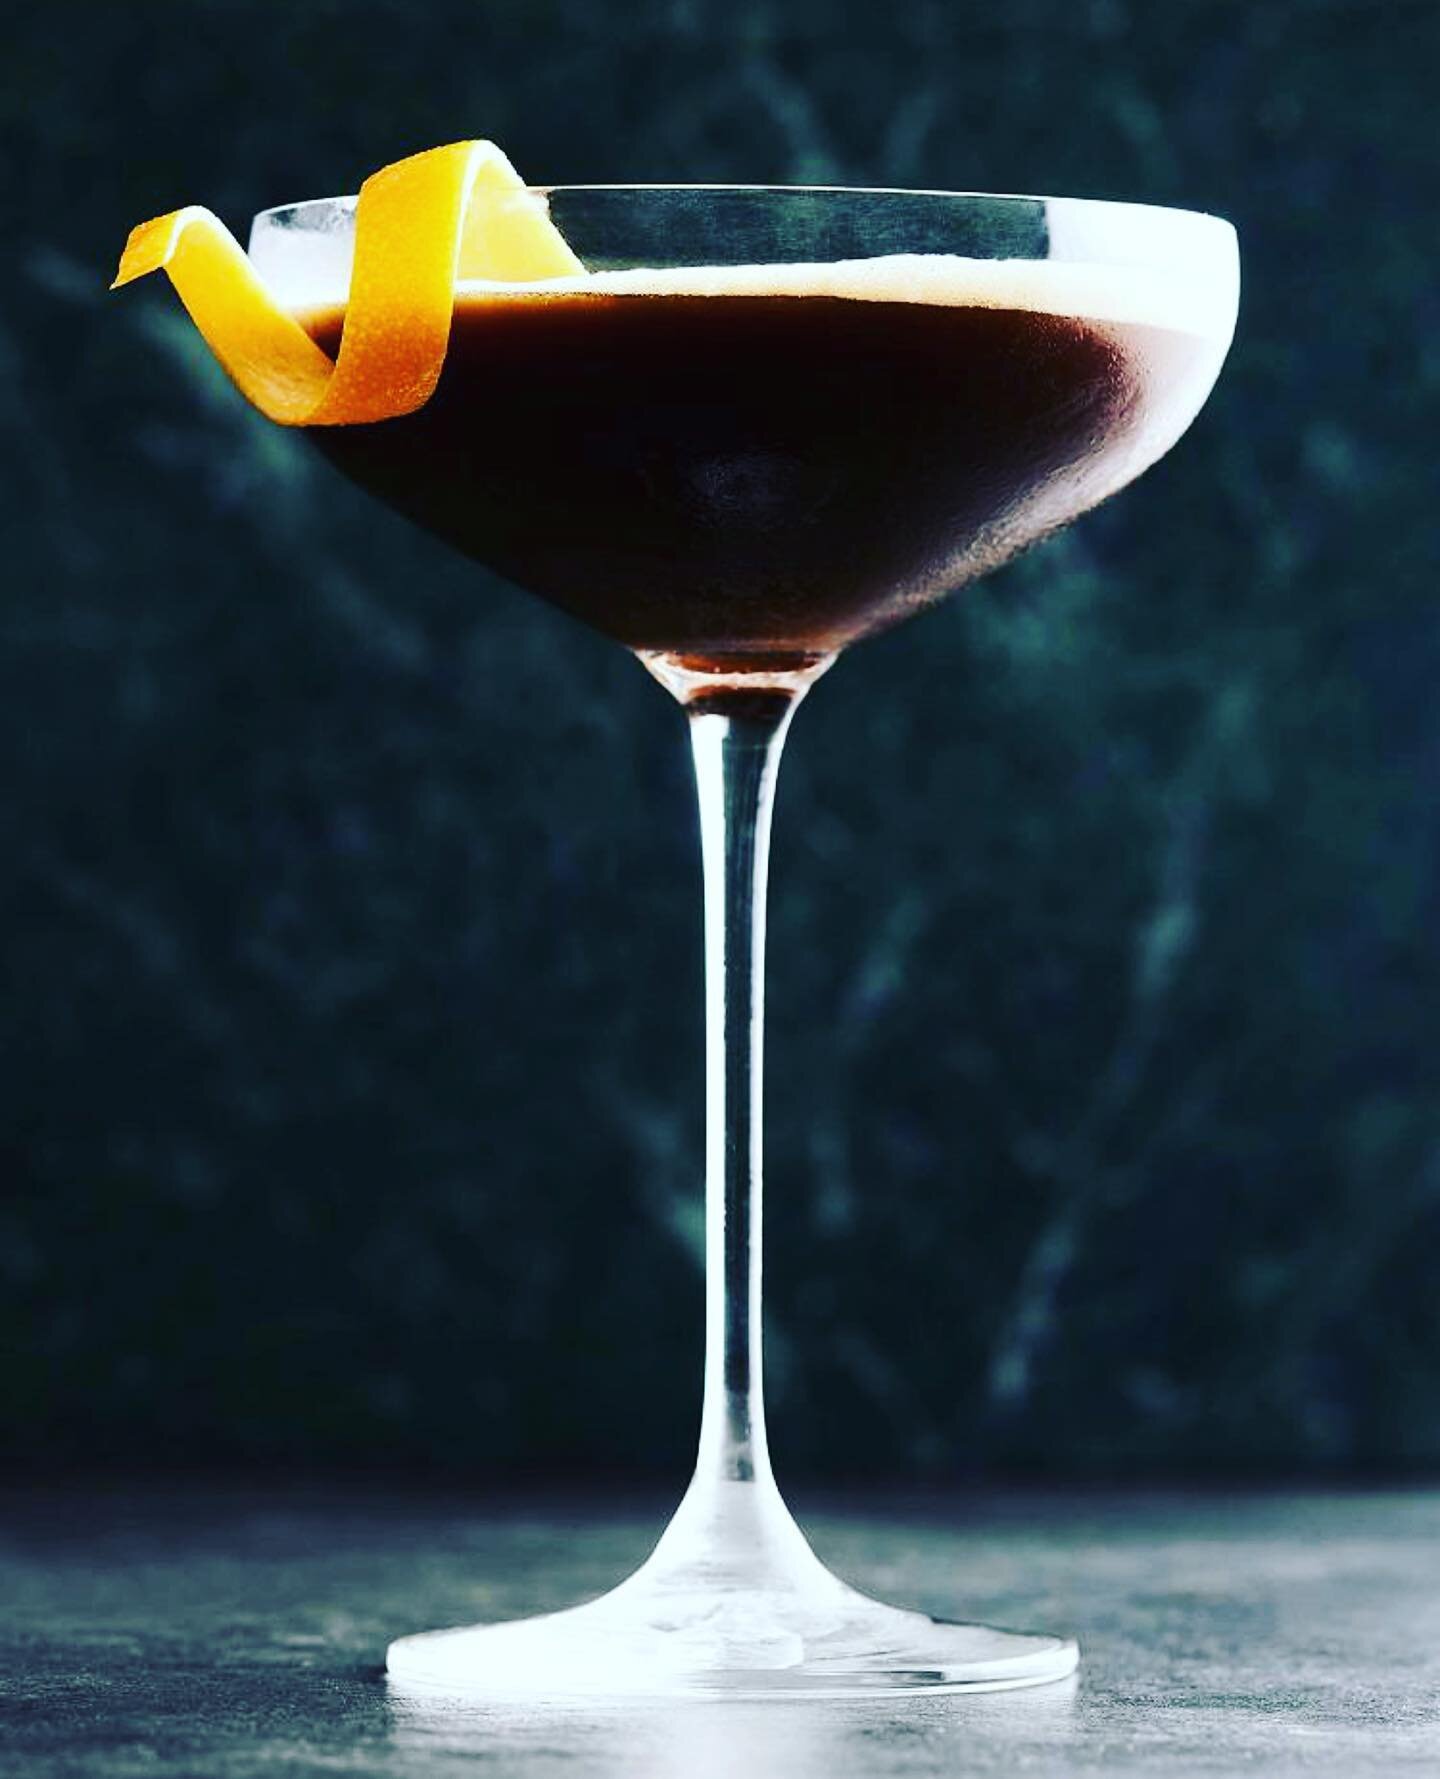 Friday !! Espresso Martini night tonight or maybe a pm pick me up - I made this one for @crateandbarrel - it has an orange syrup - recipe on their site /// make sure it&rsquo;s ice cold and use good quality espresso 📷 @sharyncairns / props @lynseyfr